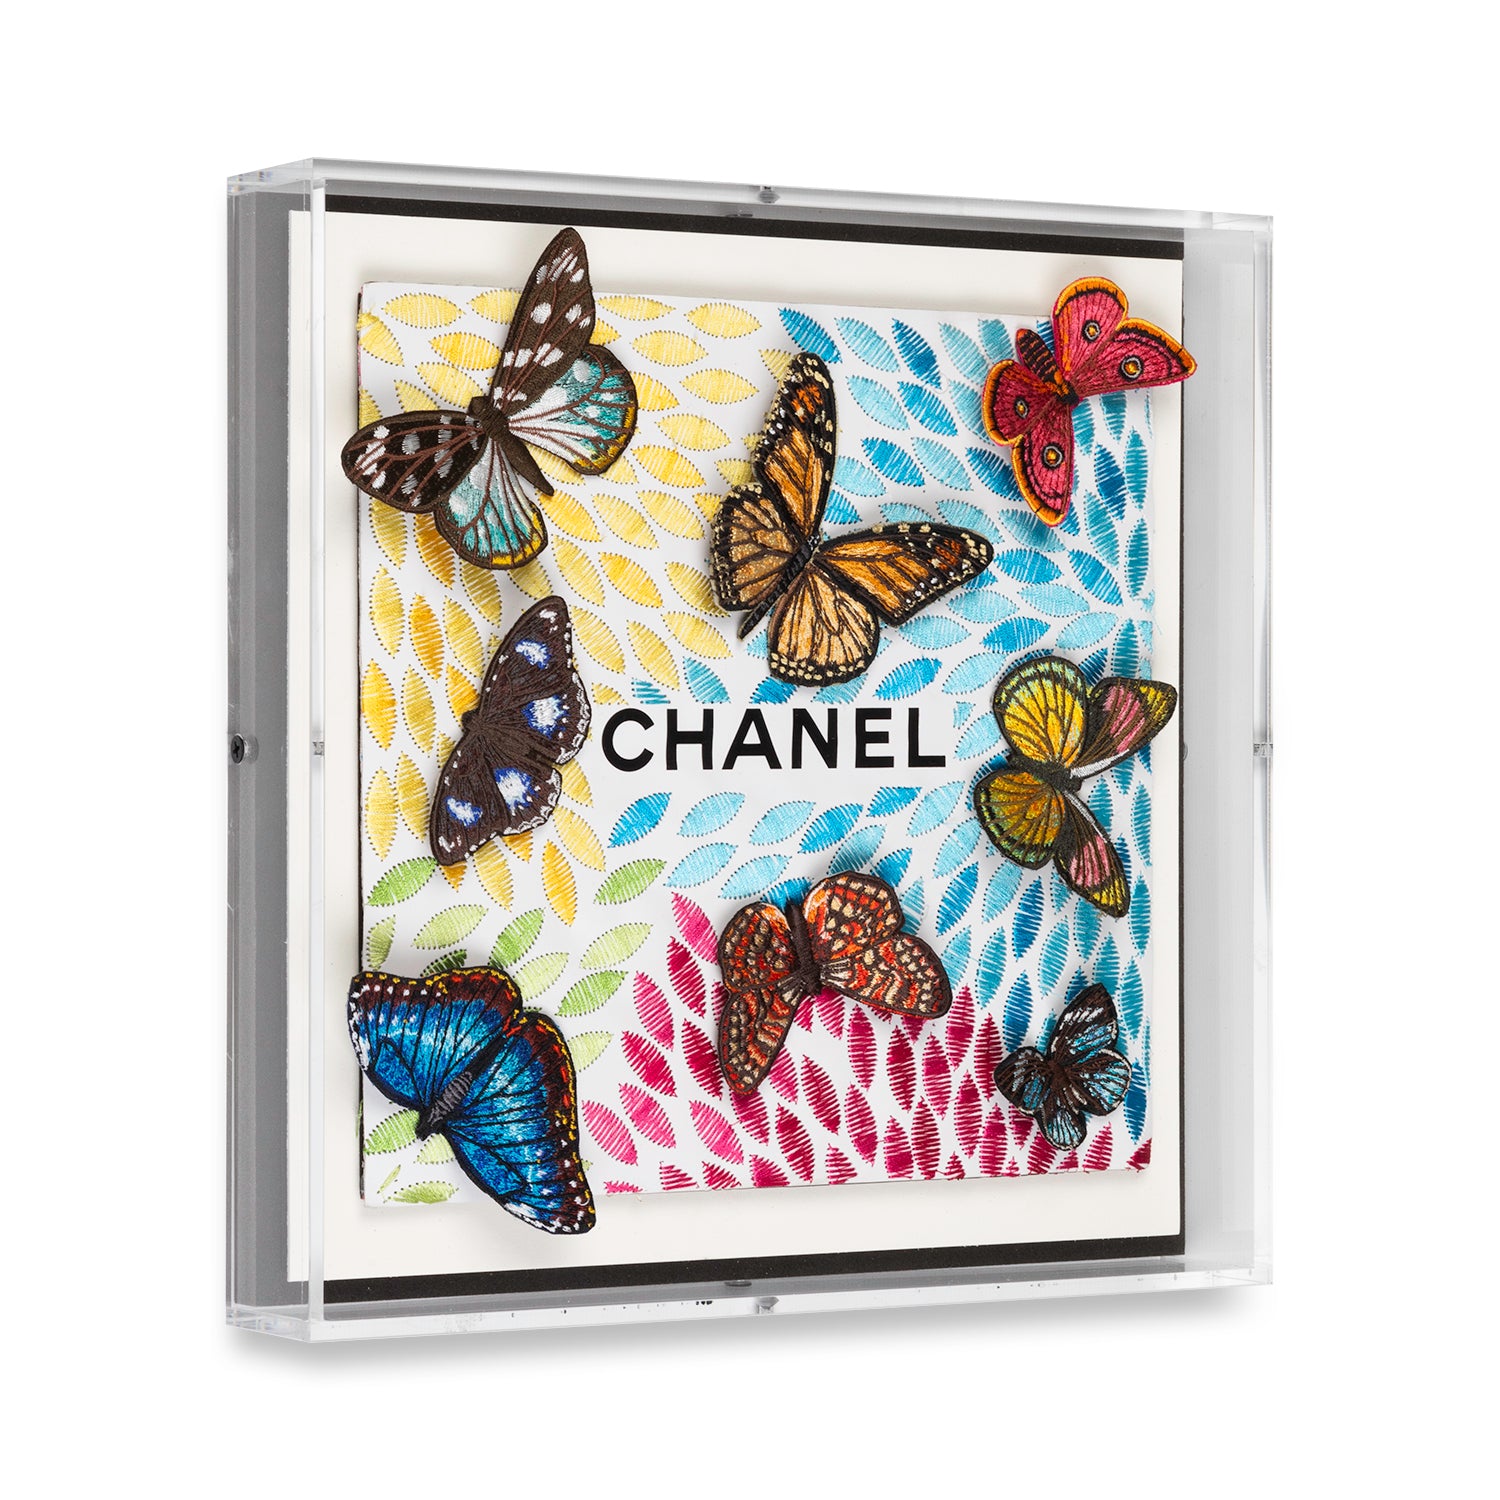 Chanel Petals with Butterflies by Stephen Wilson 12x12x2